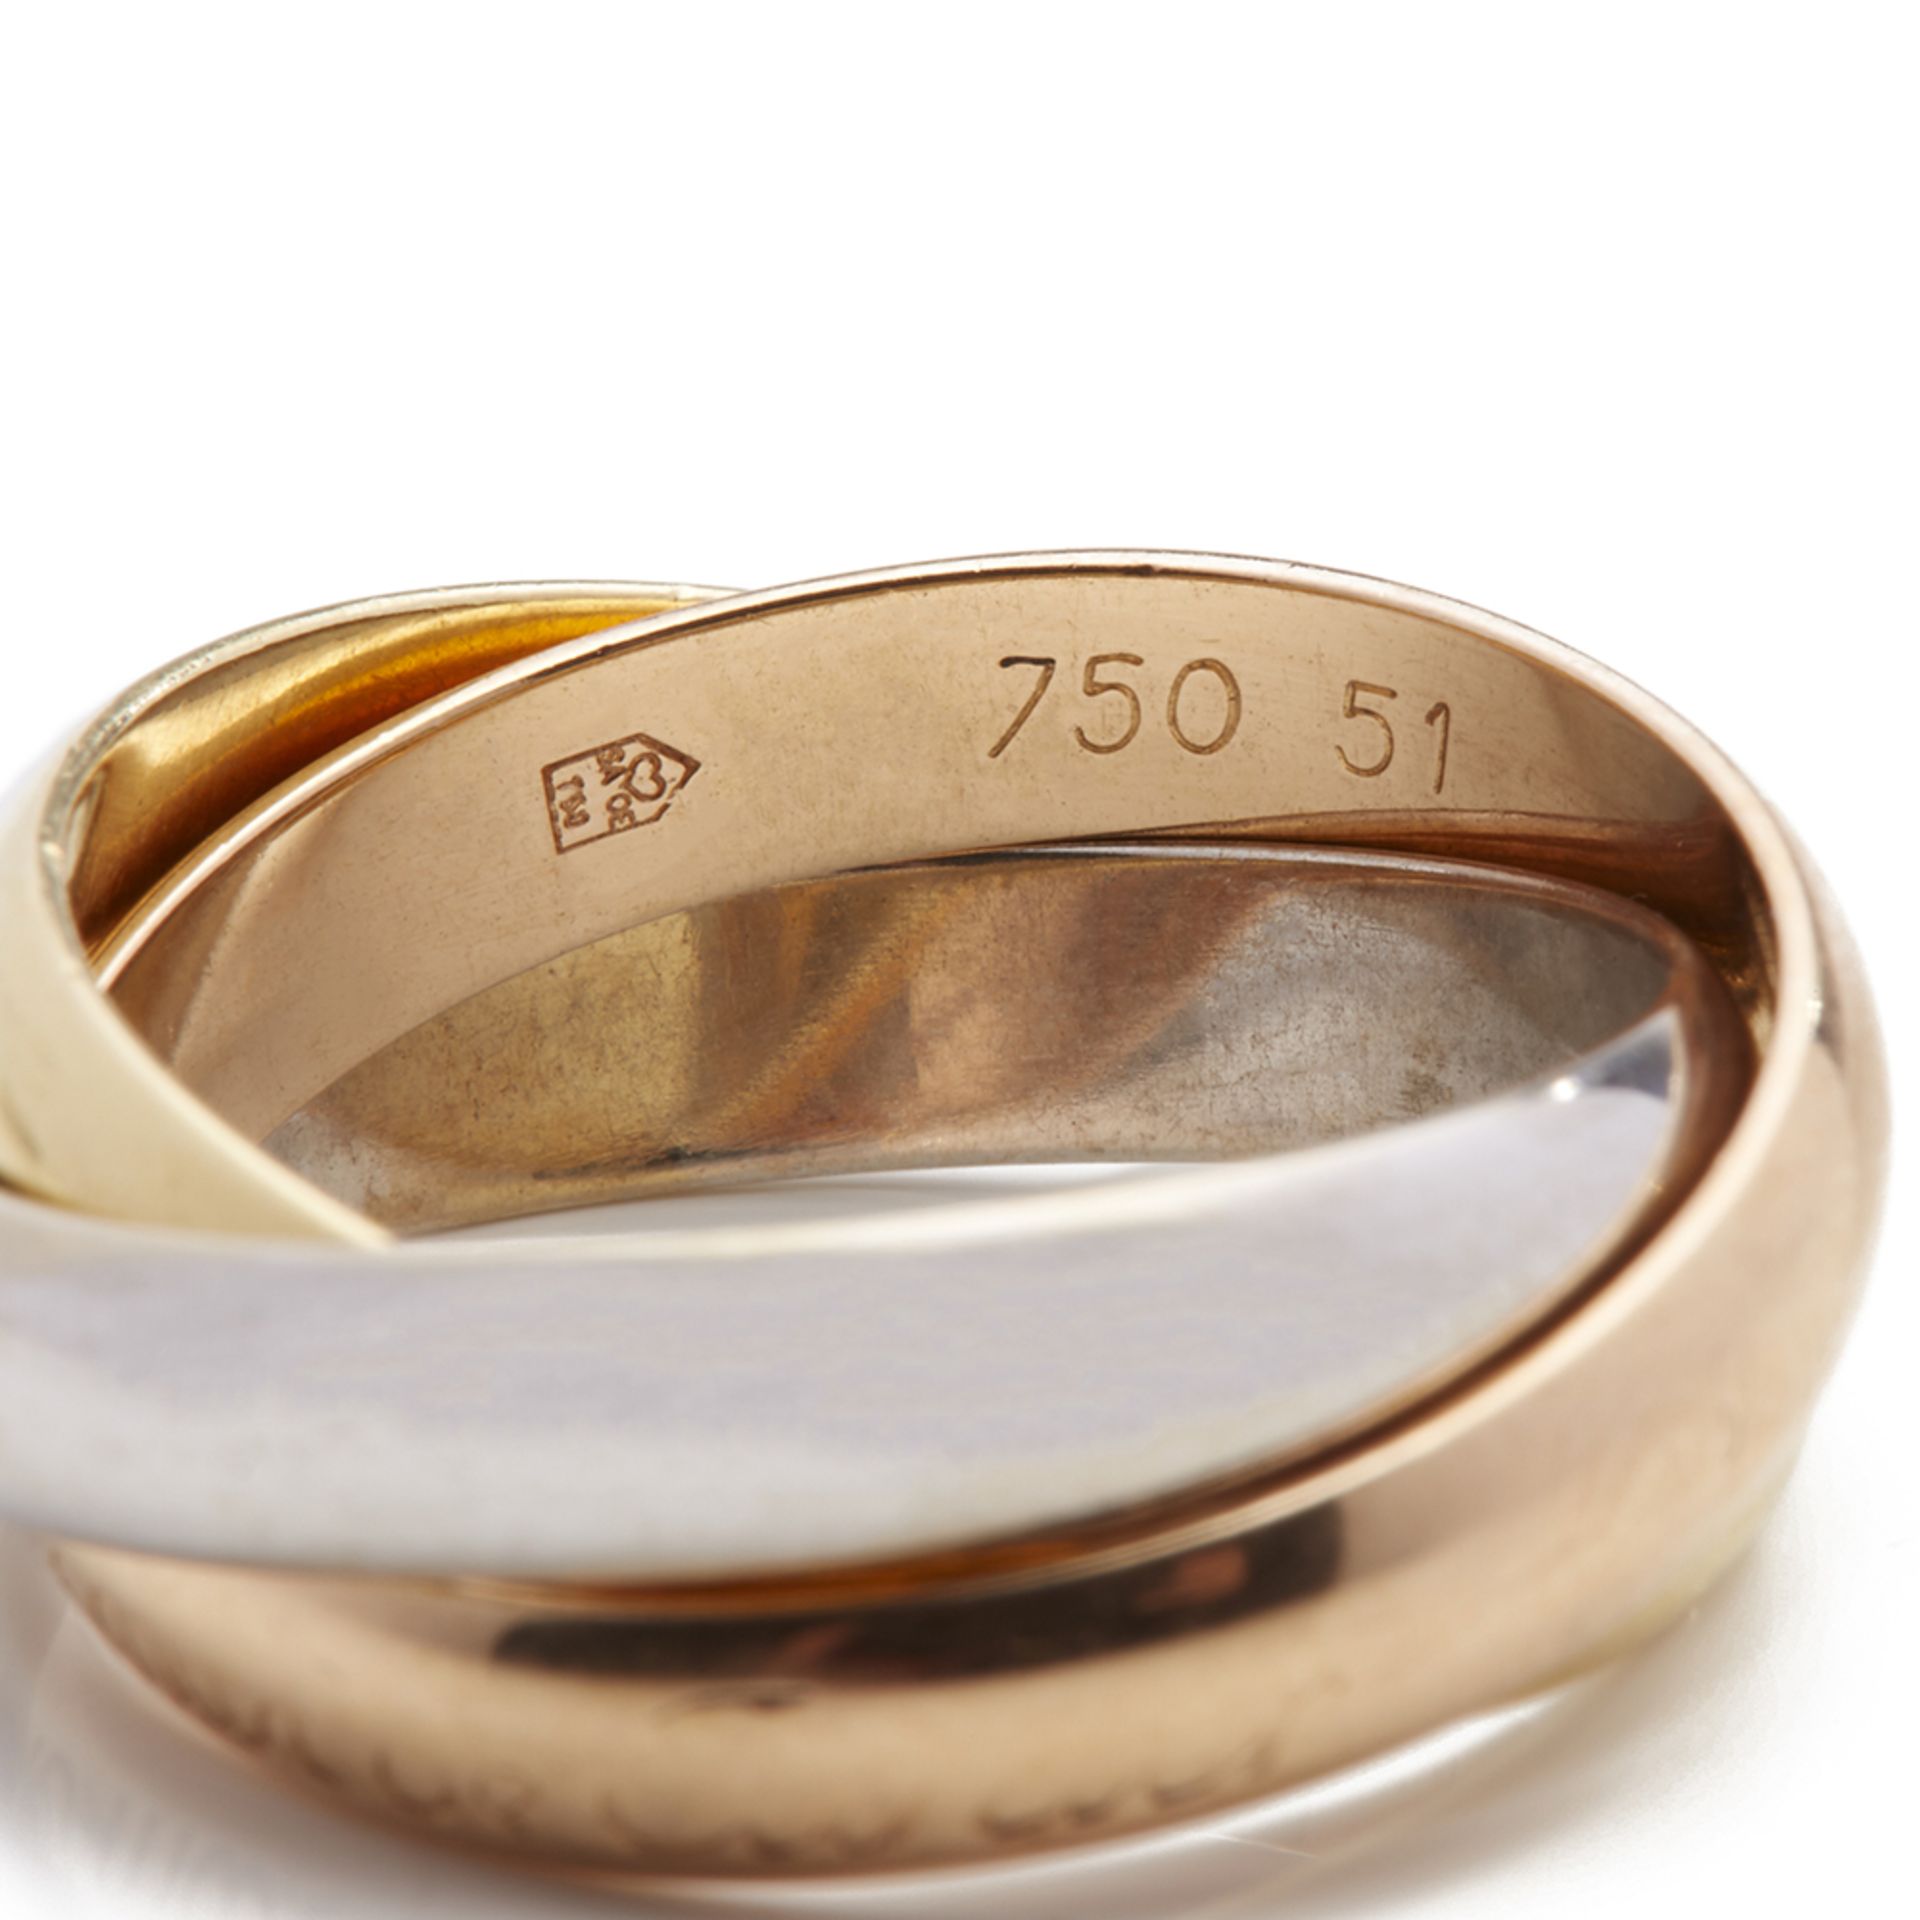 Cartier Trinity Ring Size L - Image 6 of 7